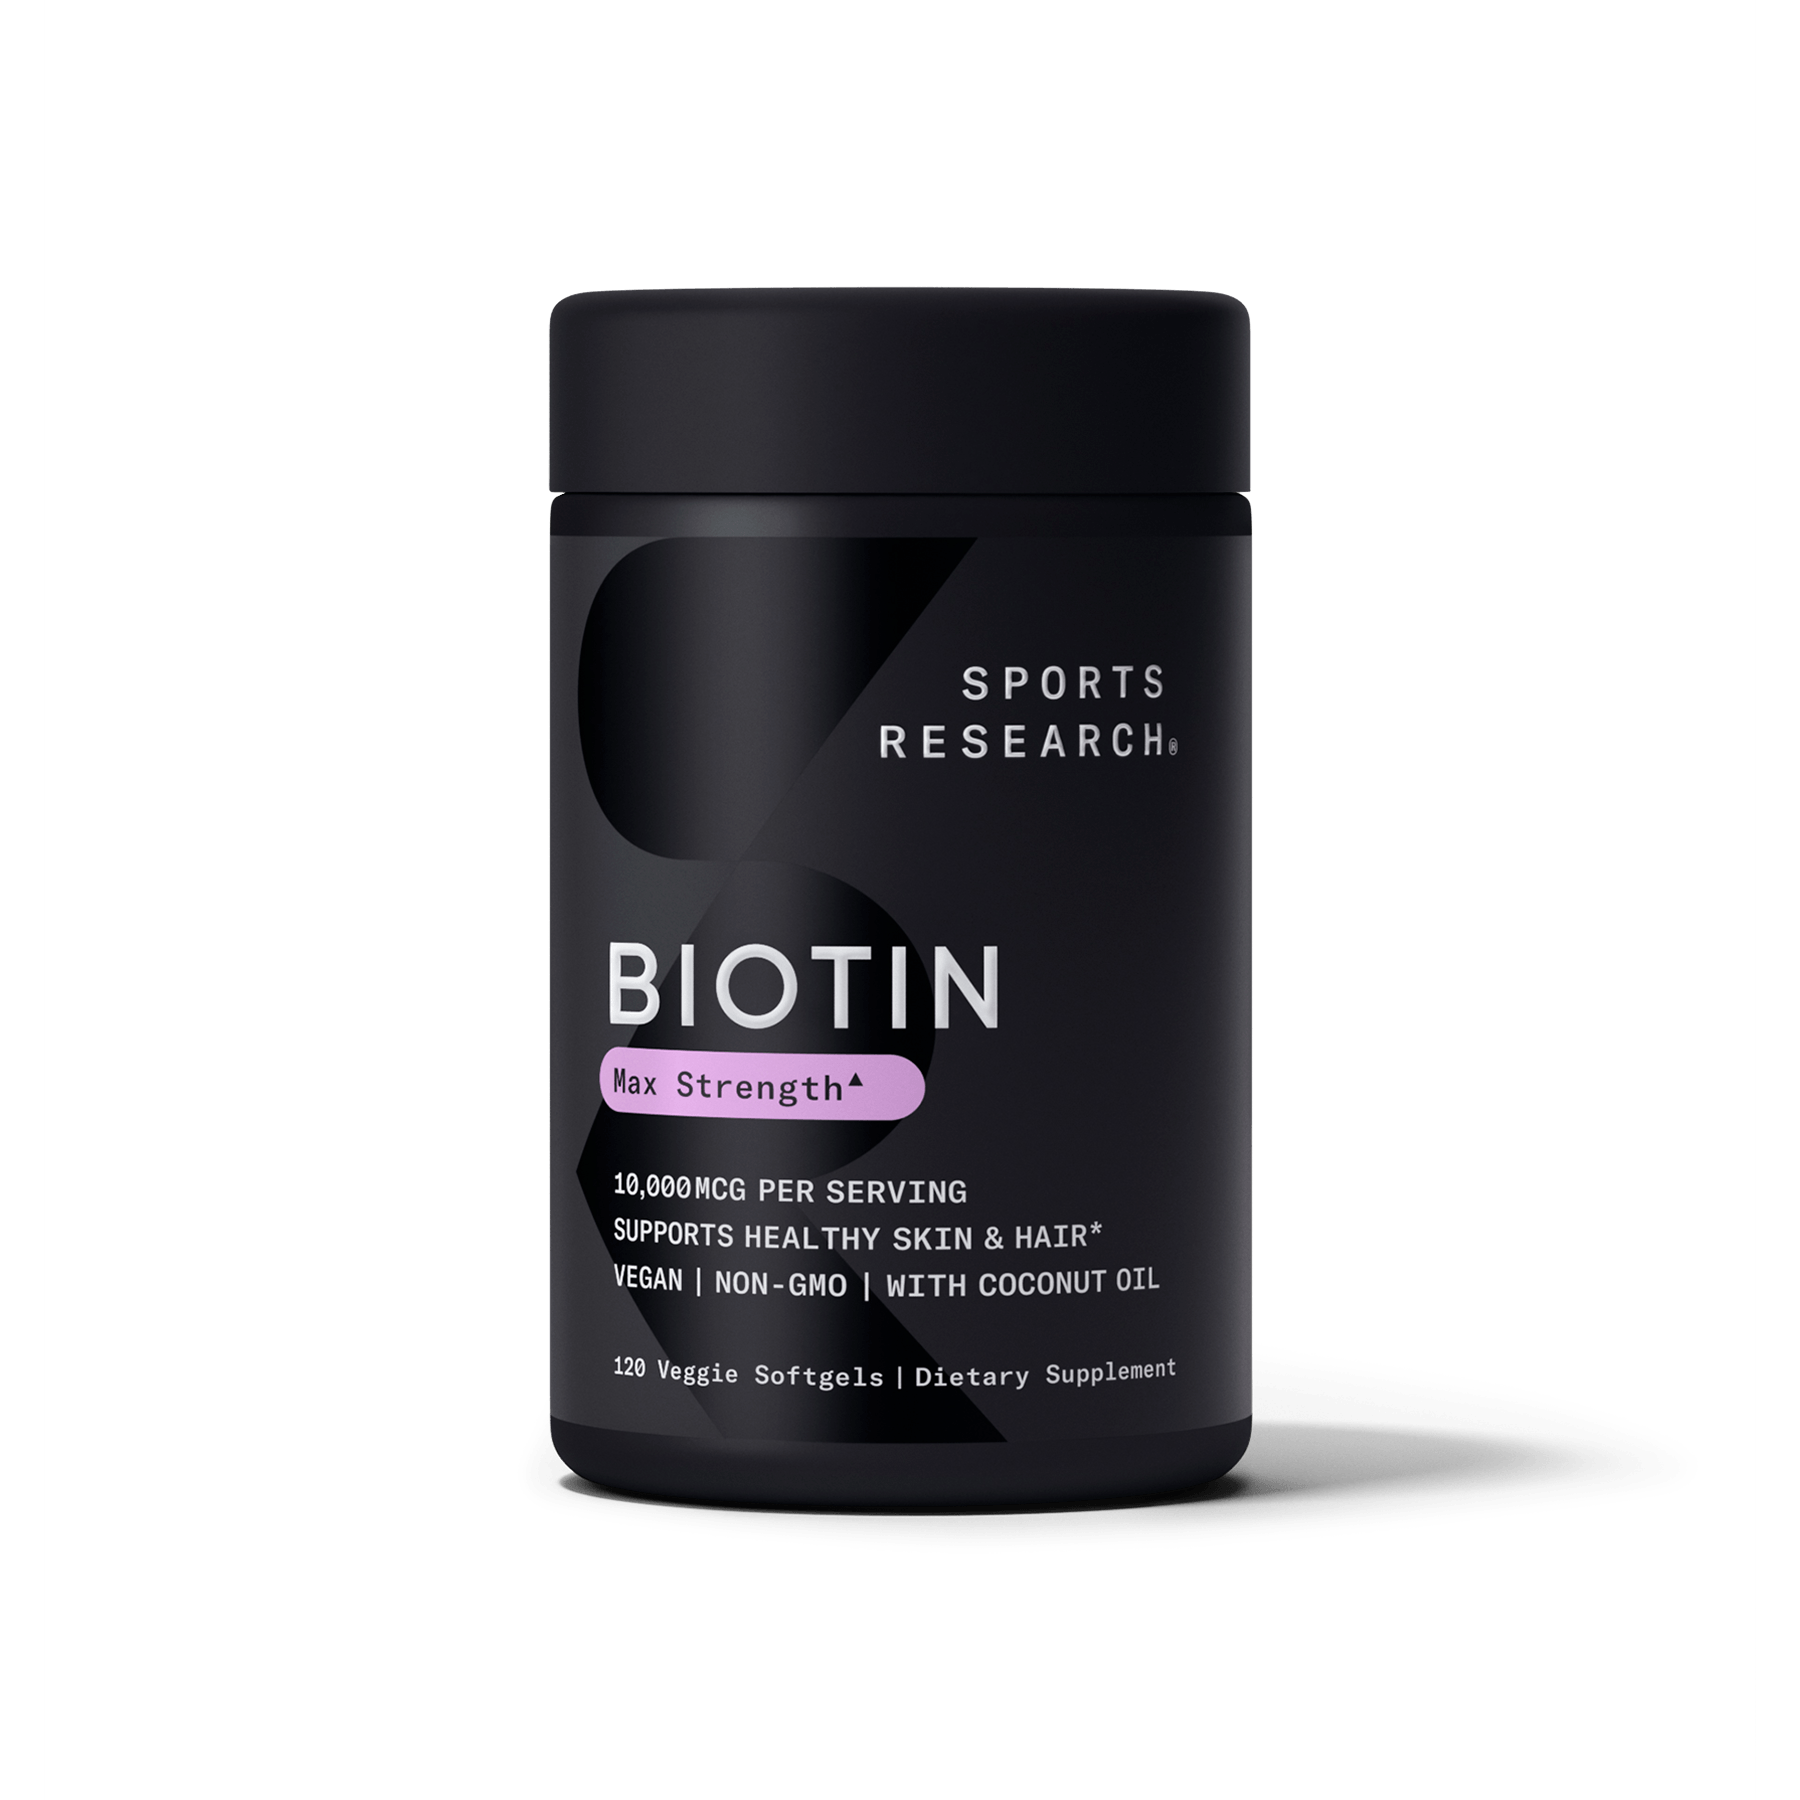 Biotin 101: What Is It and Why Its Good for Hair?